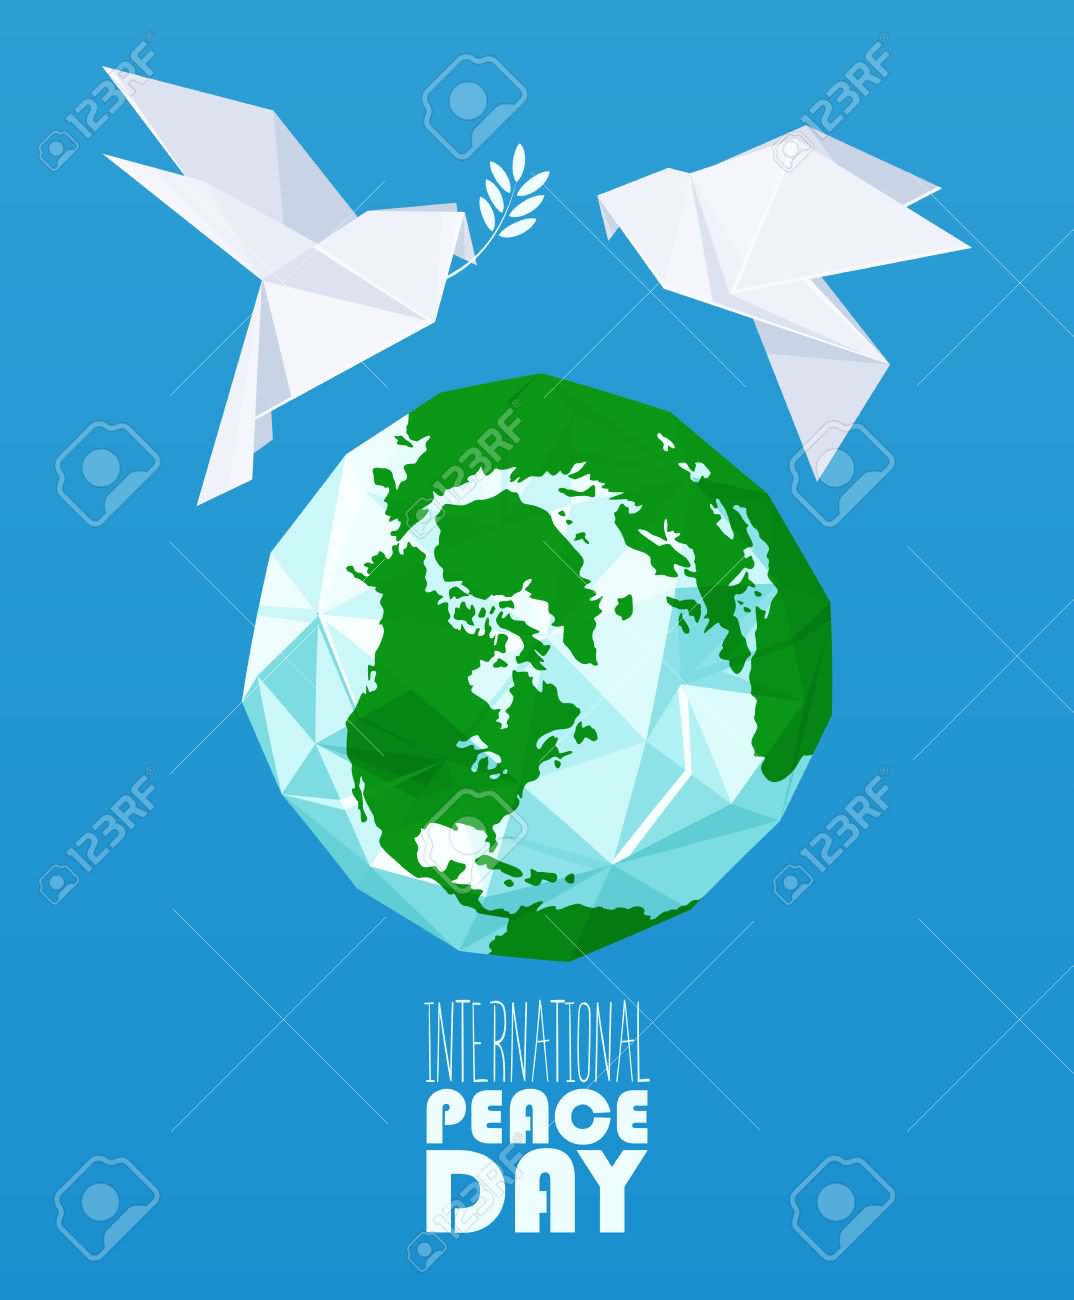 International Peace Day Doves With Olive Branches Poster